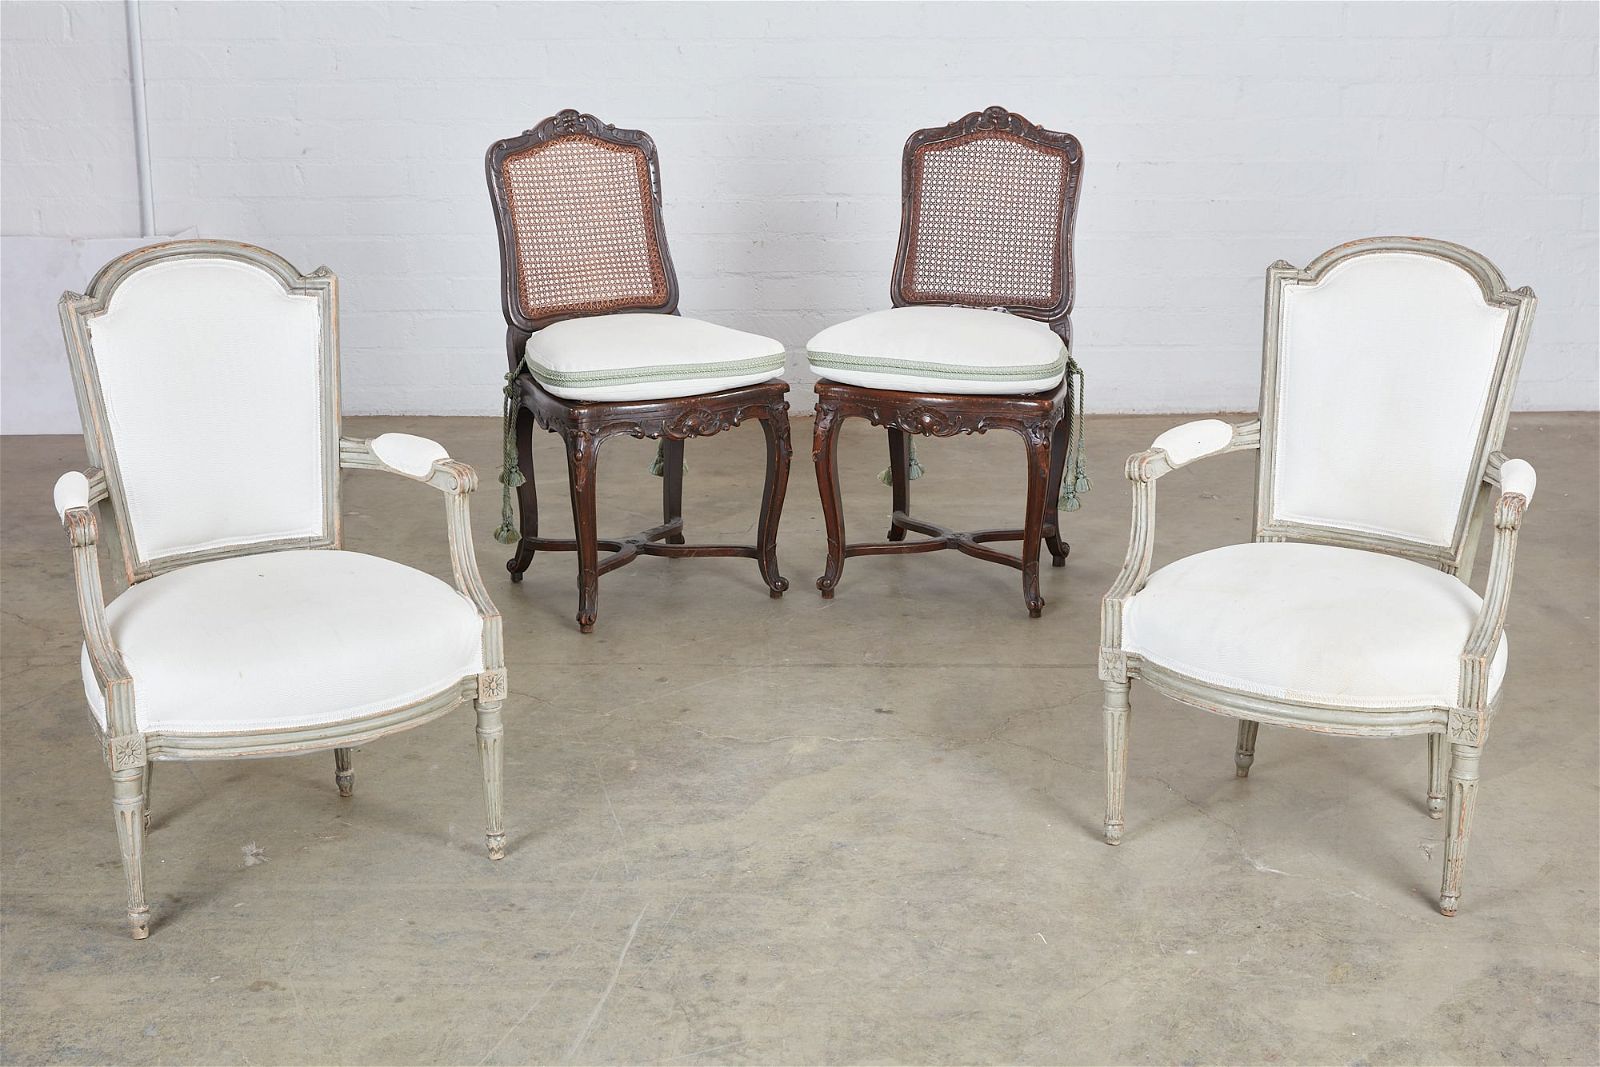 A PAIR OF LOUIS XV FAUTEUILS WITH 2fb39f0